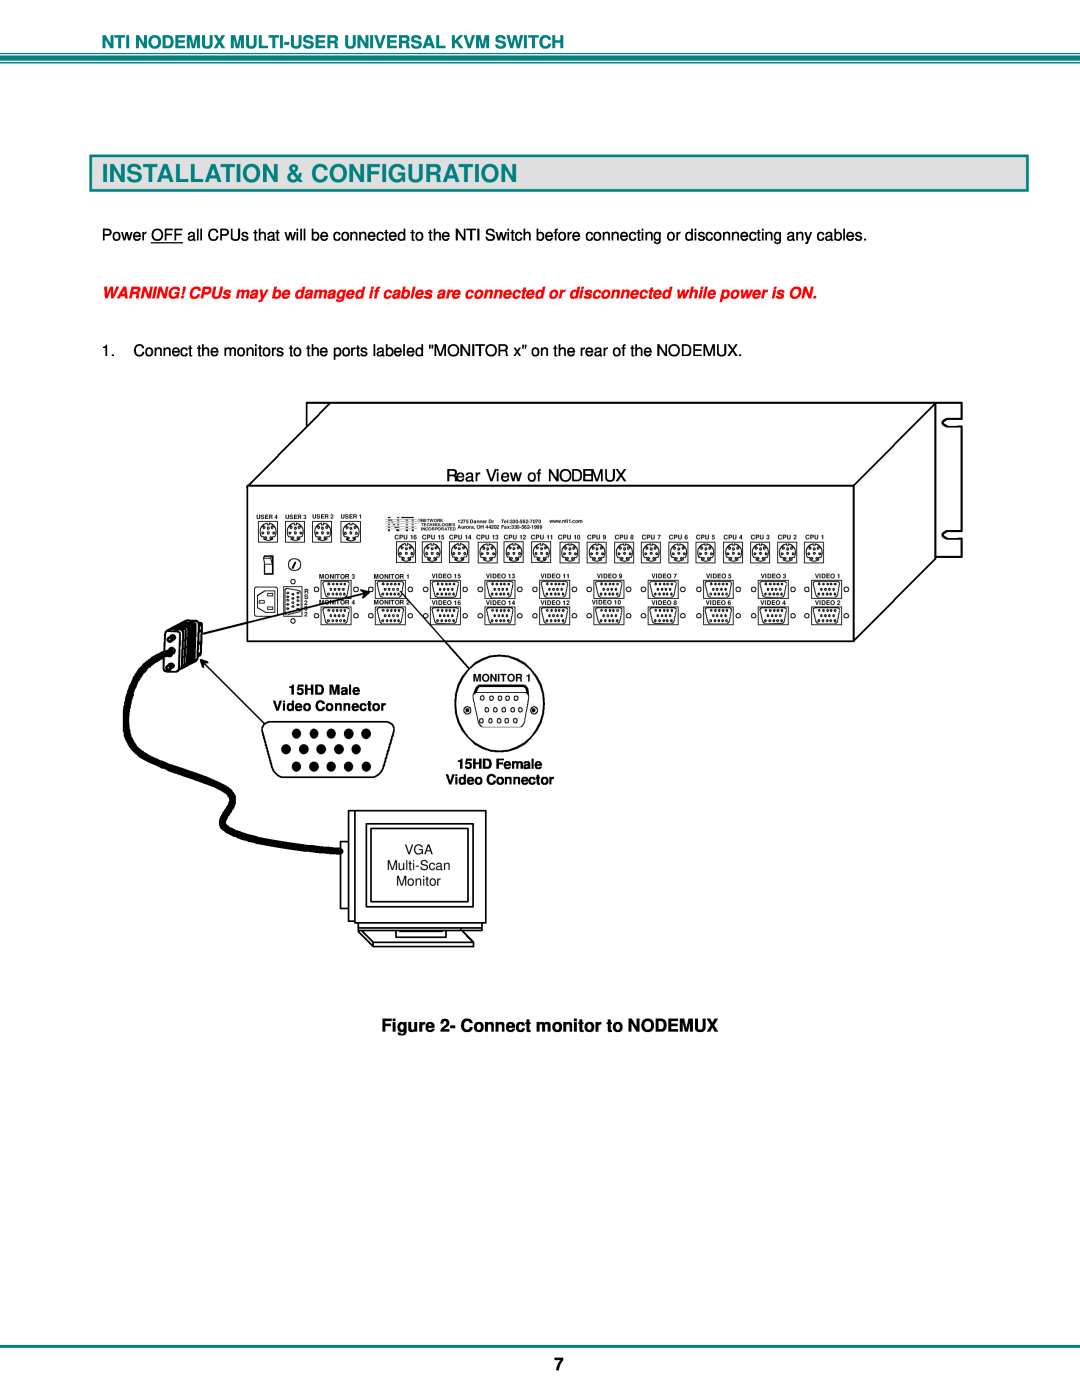 Network Technologies ST-nXm-U operation manual Installation & Configuration, Connect monitor to NODEMUX 